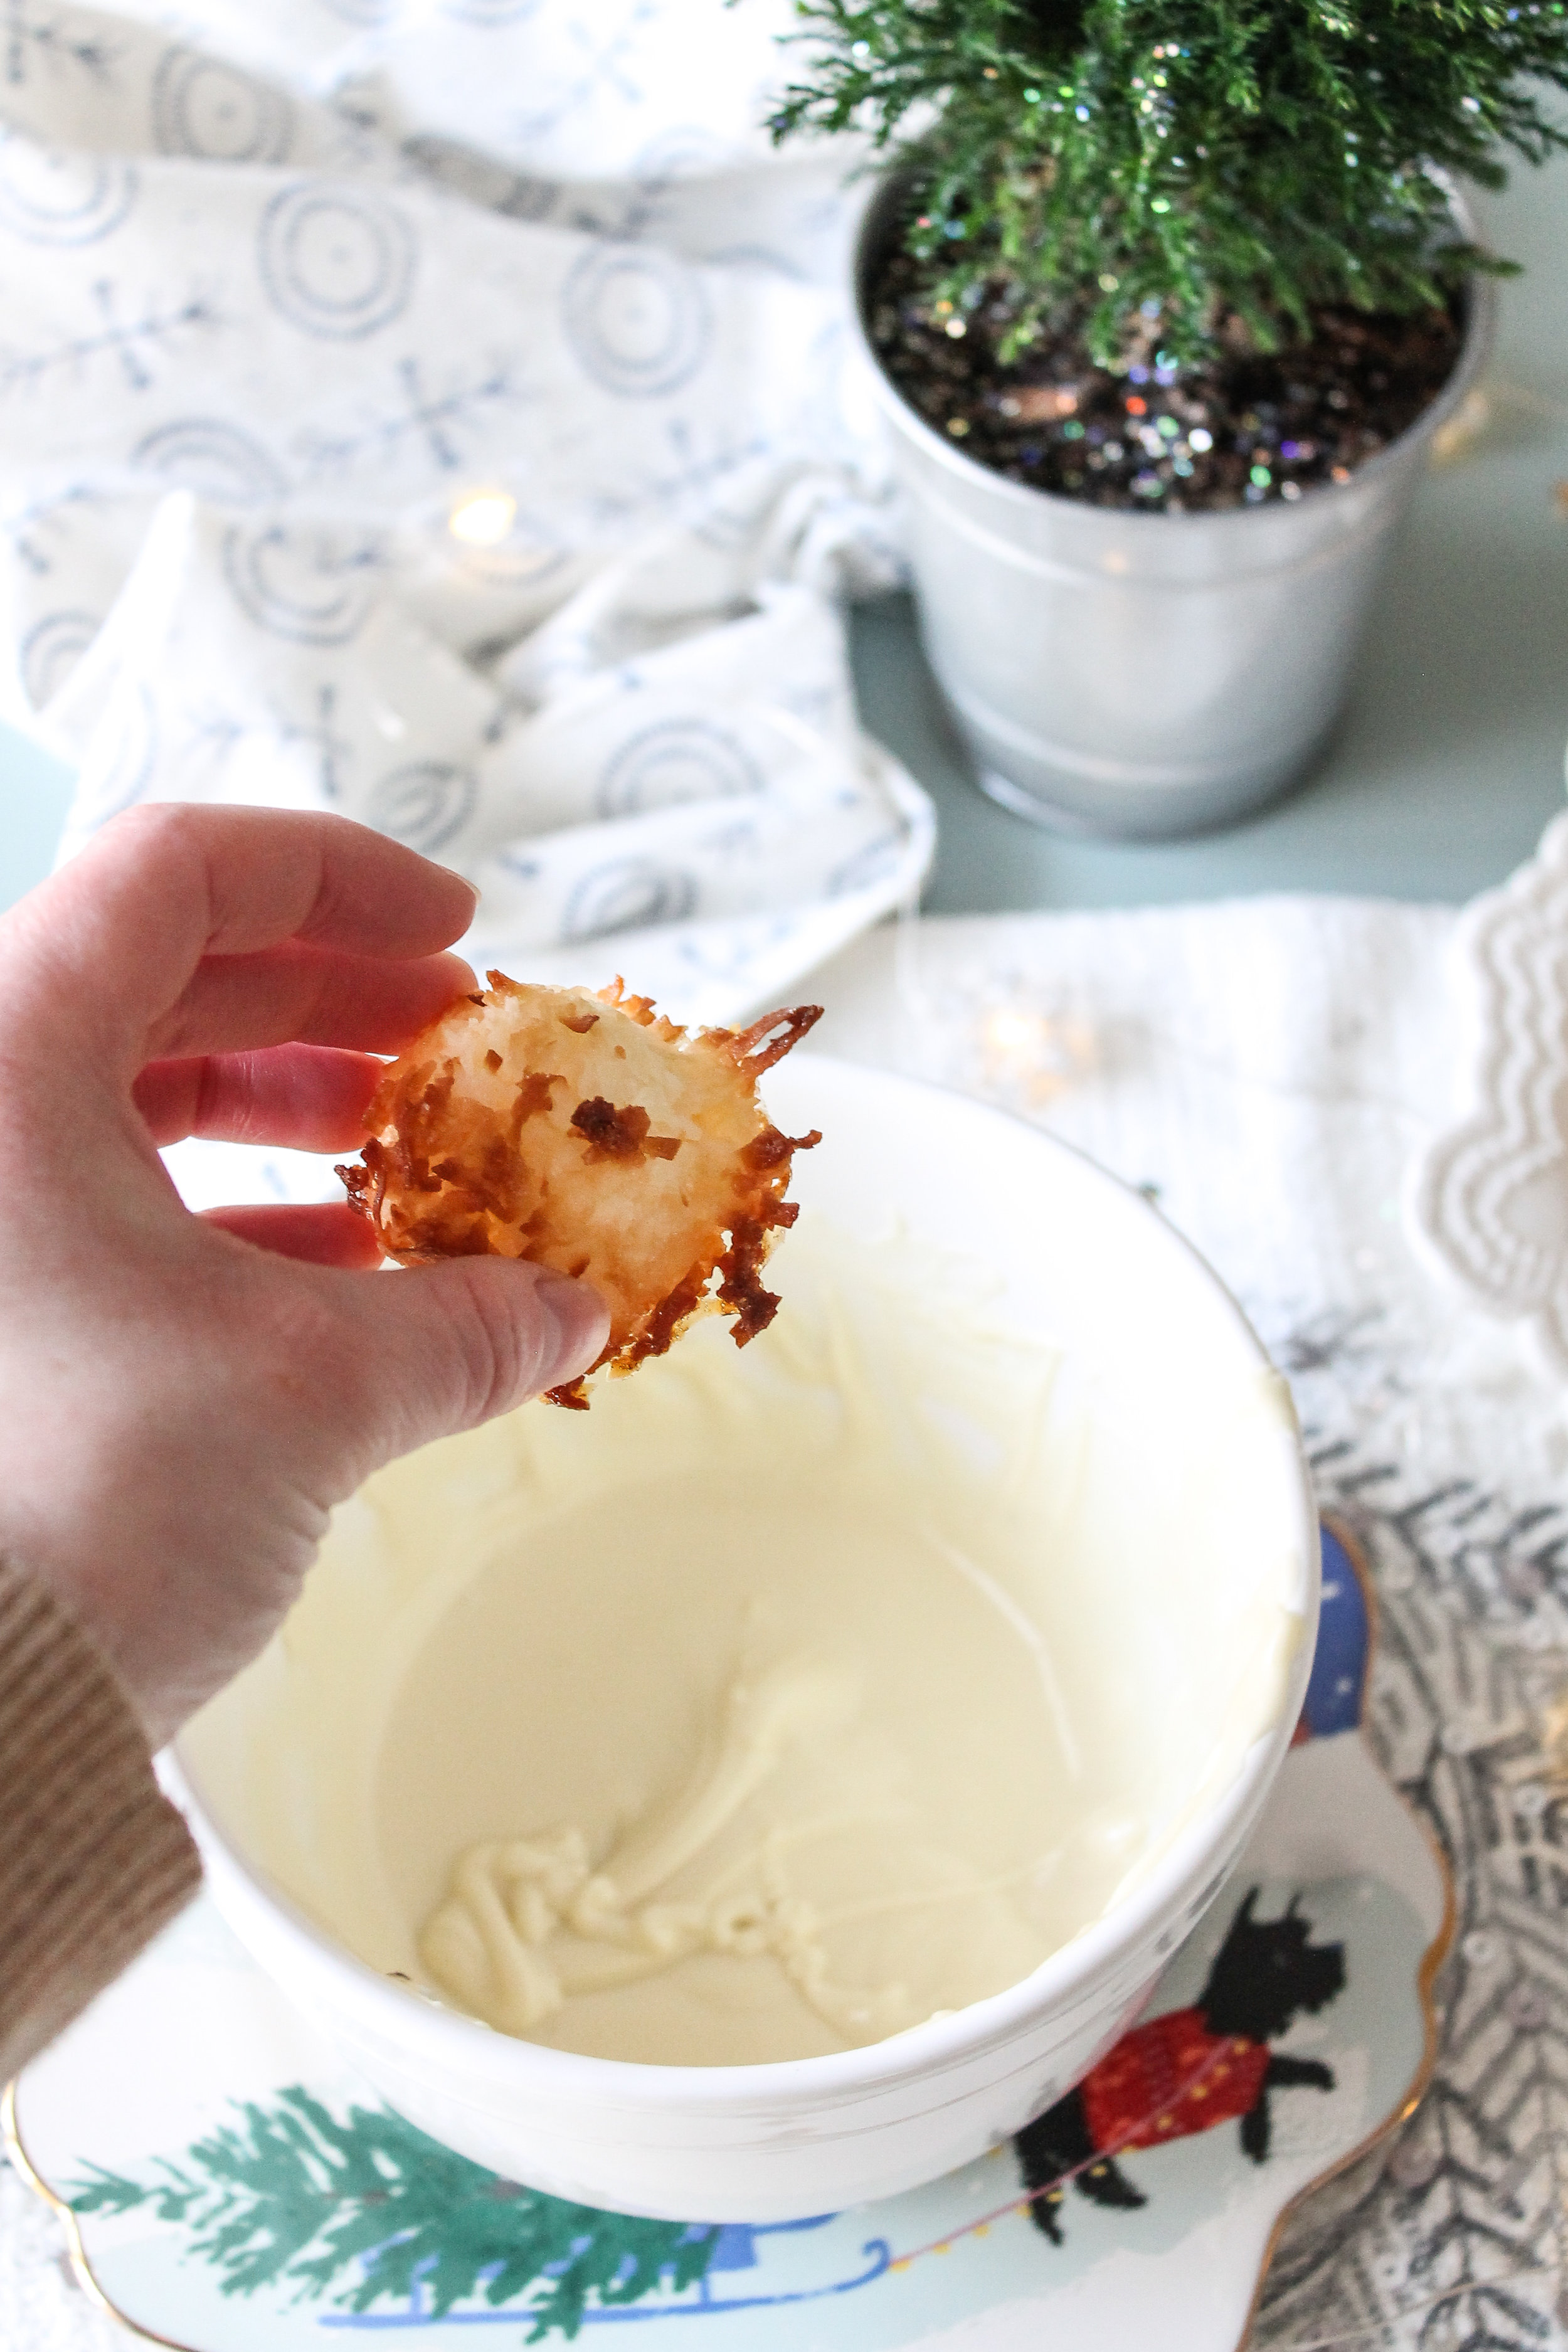 These super simple lemon coconut macaroons are sure to be the star of this year's cookie swap!  Find the recipe on www.pedanticfoodie.com!